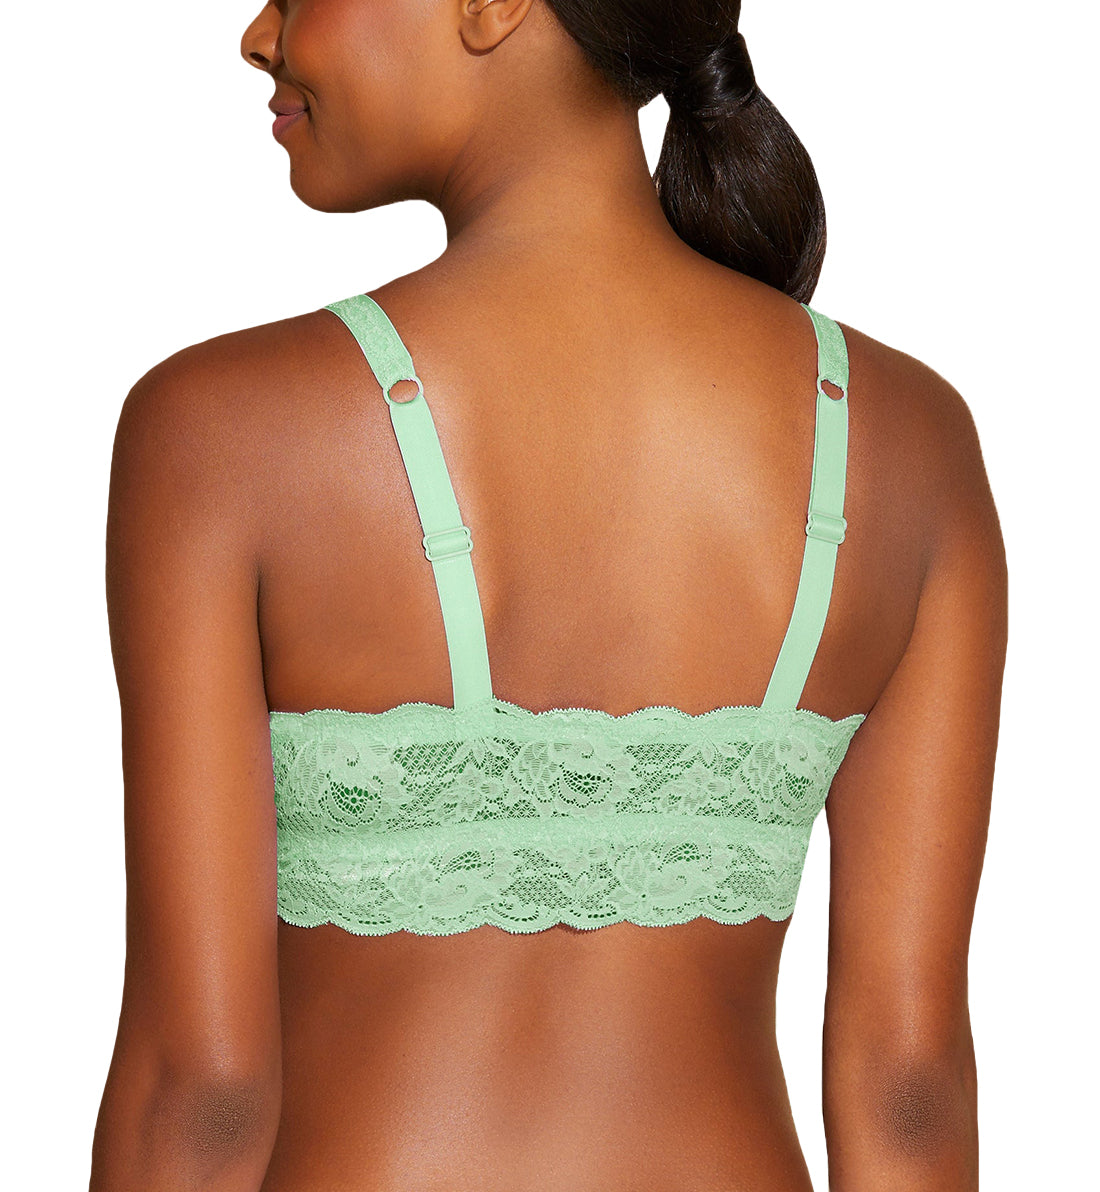 Cosabella Never Say Never CURVY Sweetie Bralette (NEVER1310),Petite,Ghana Green - Ghana Green,Petite